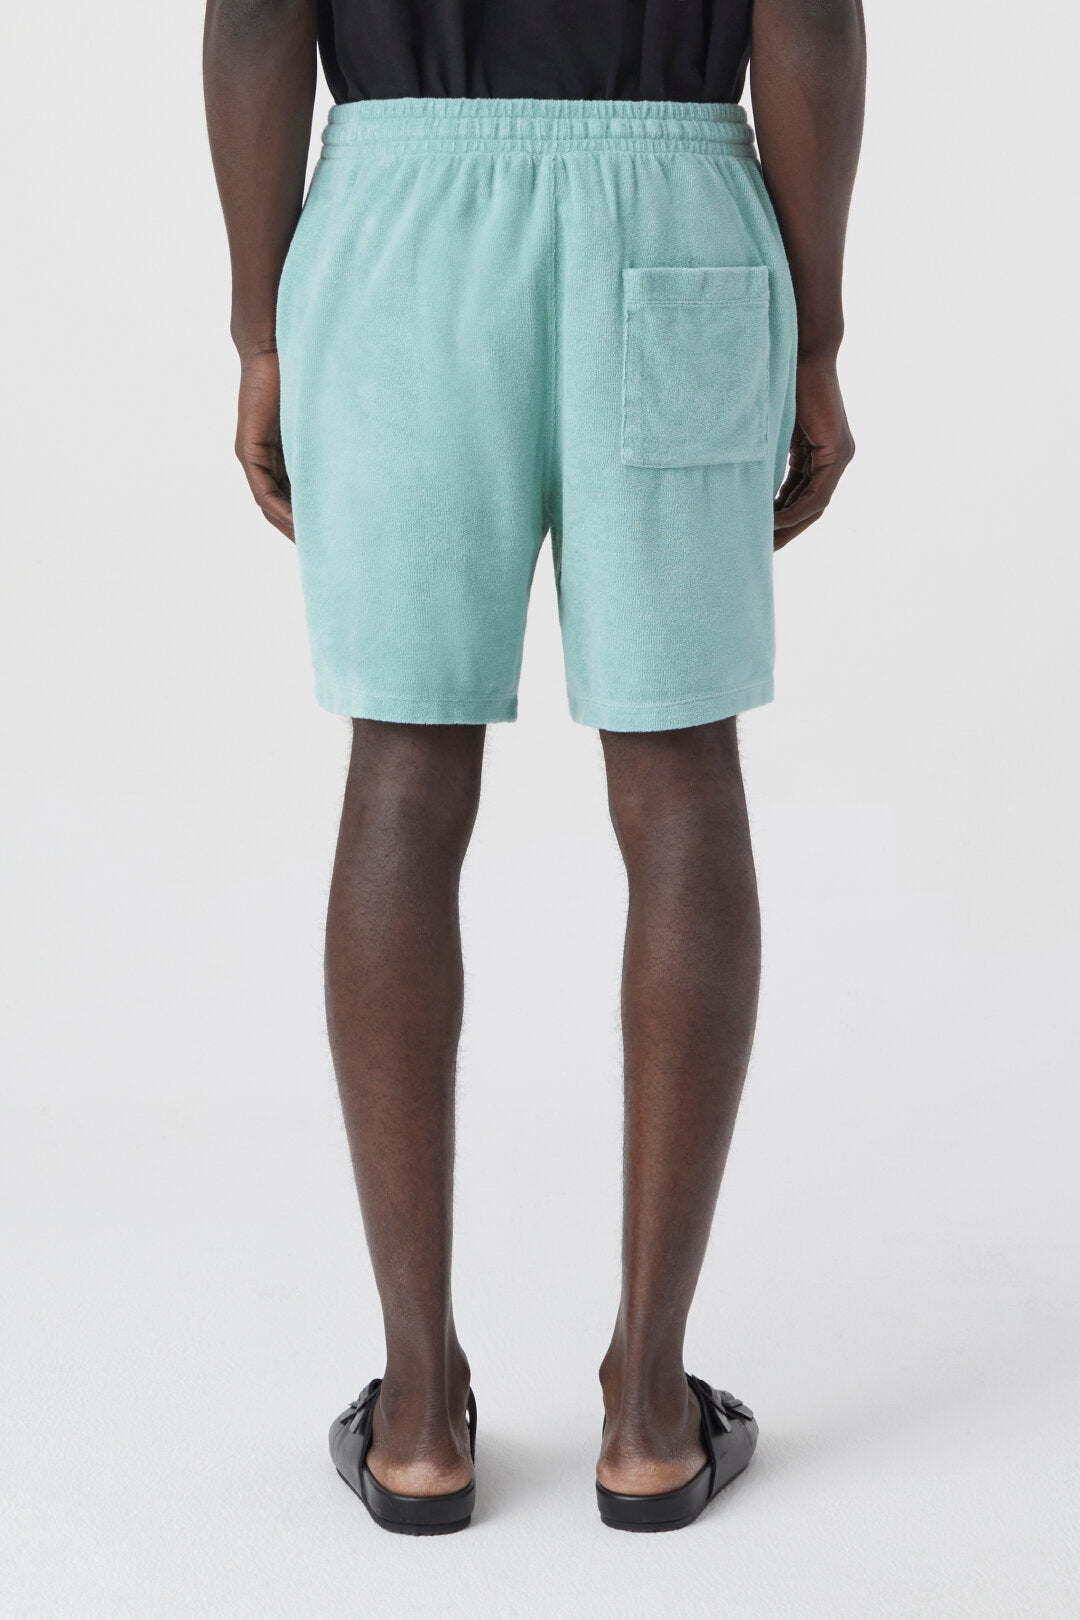 TERRY CLOTH SHORTS - BLUE AGAVE